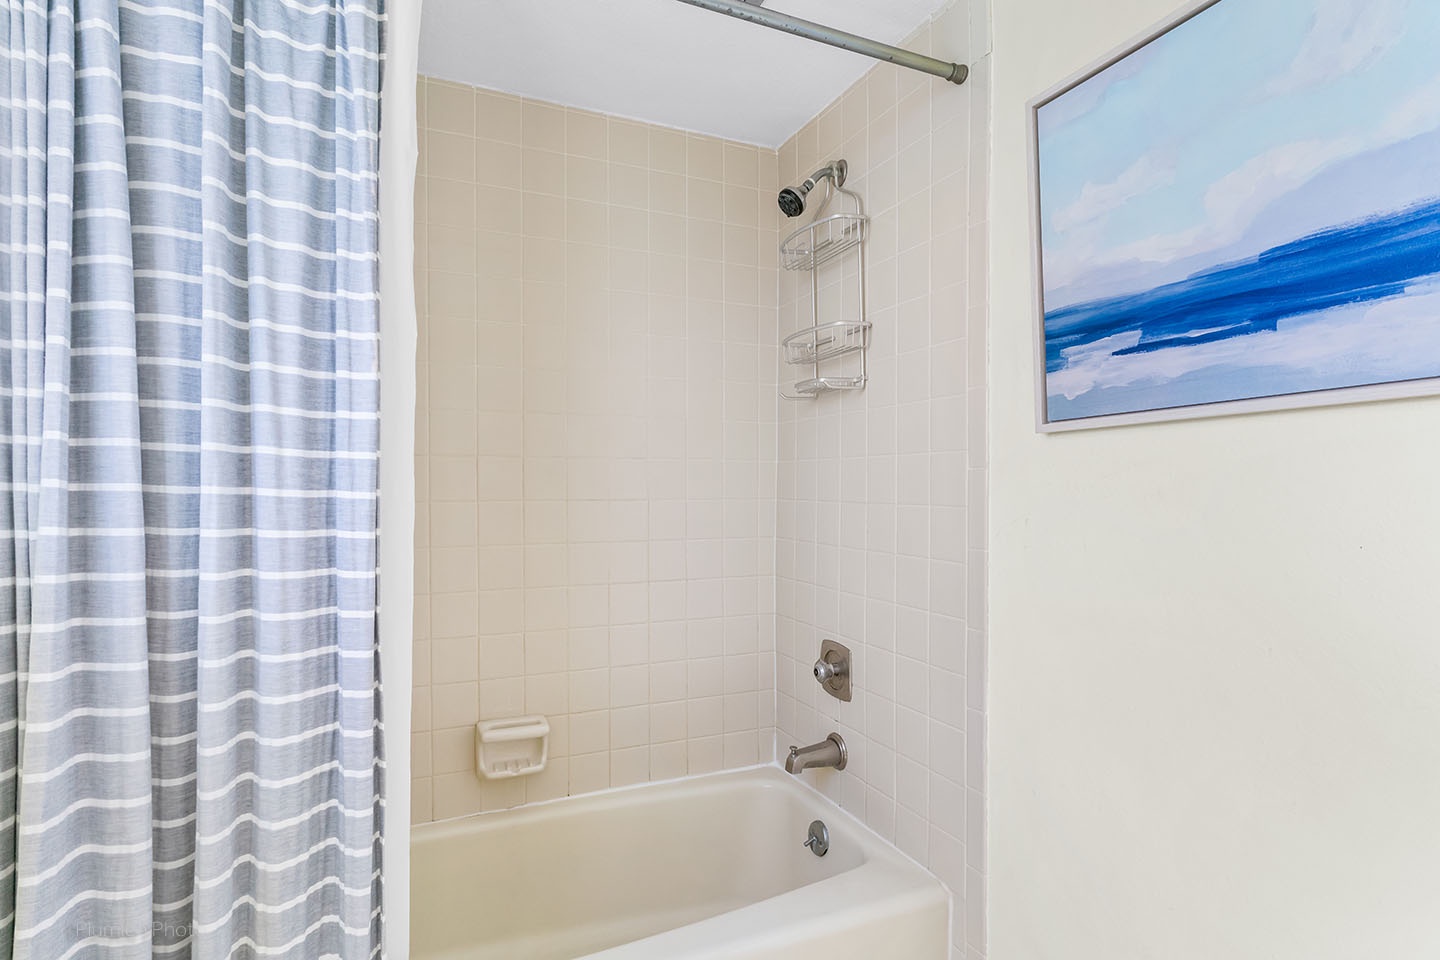 The master bath has a tub & shower combo.